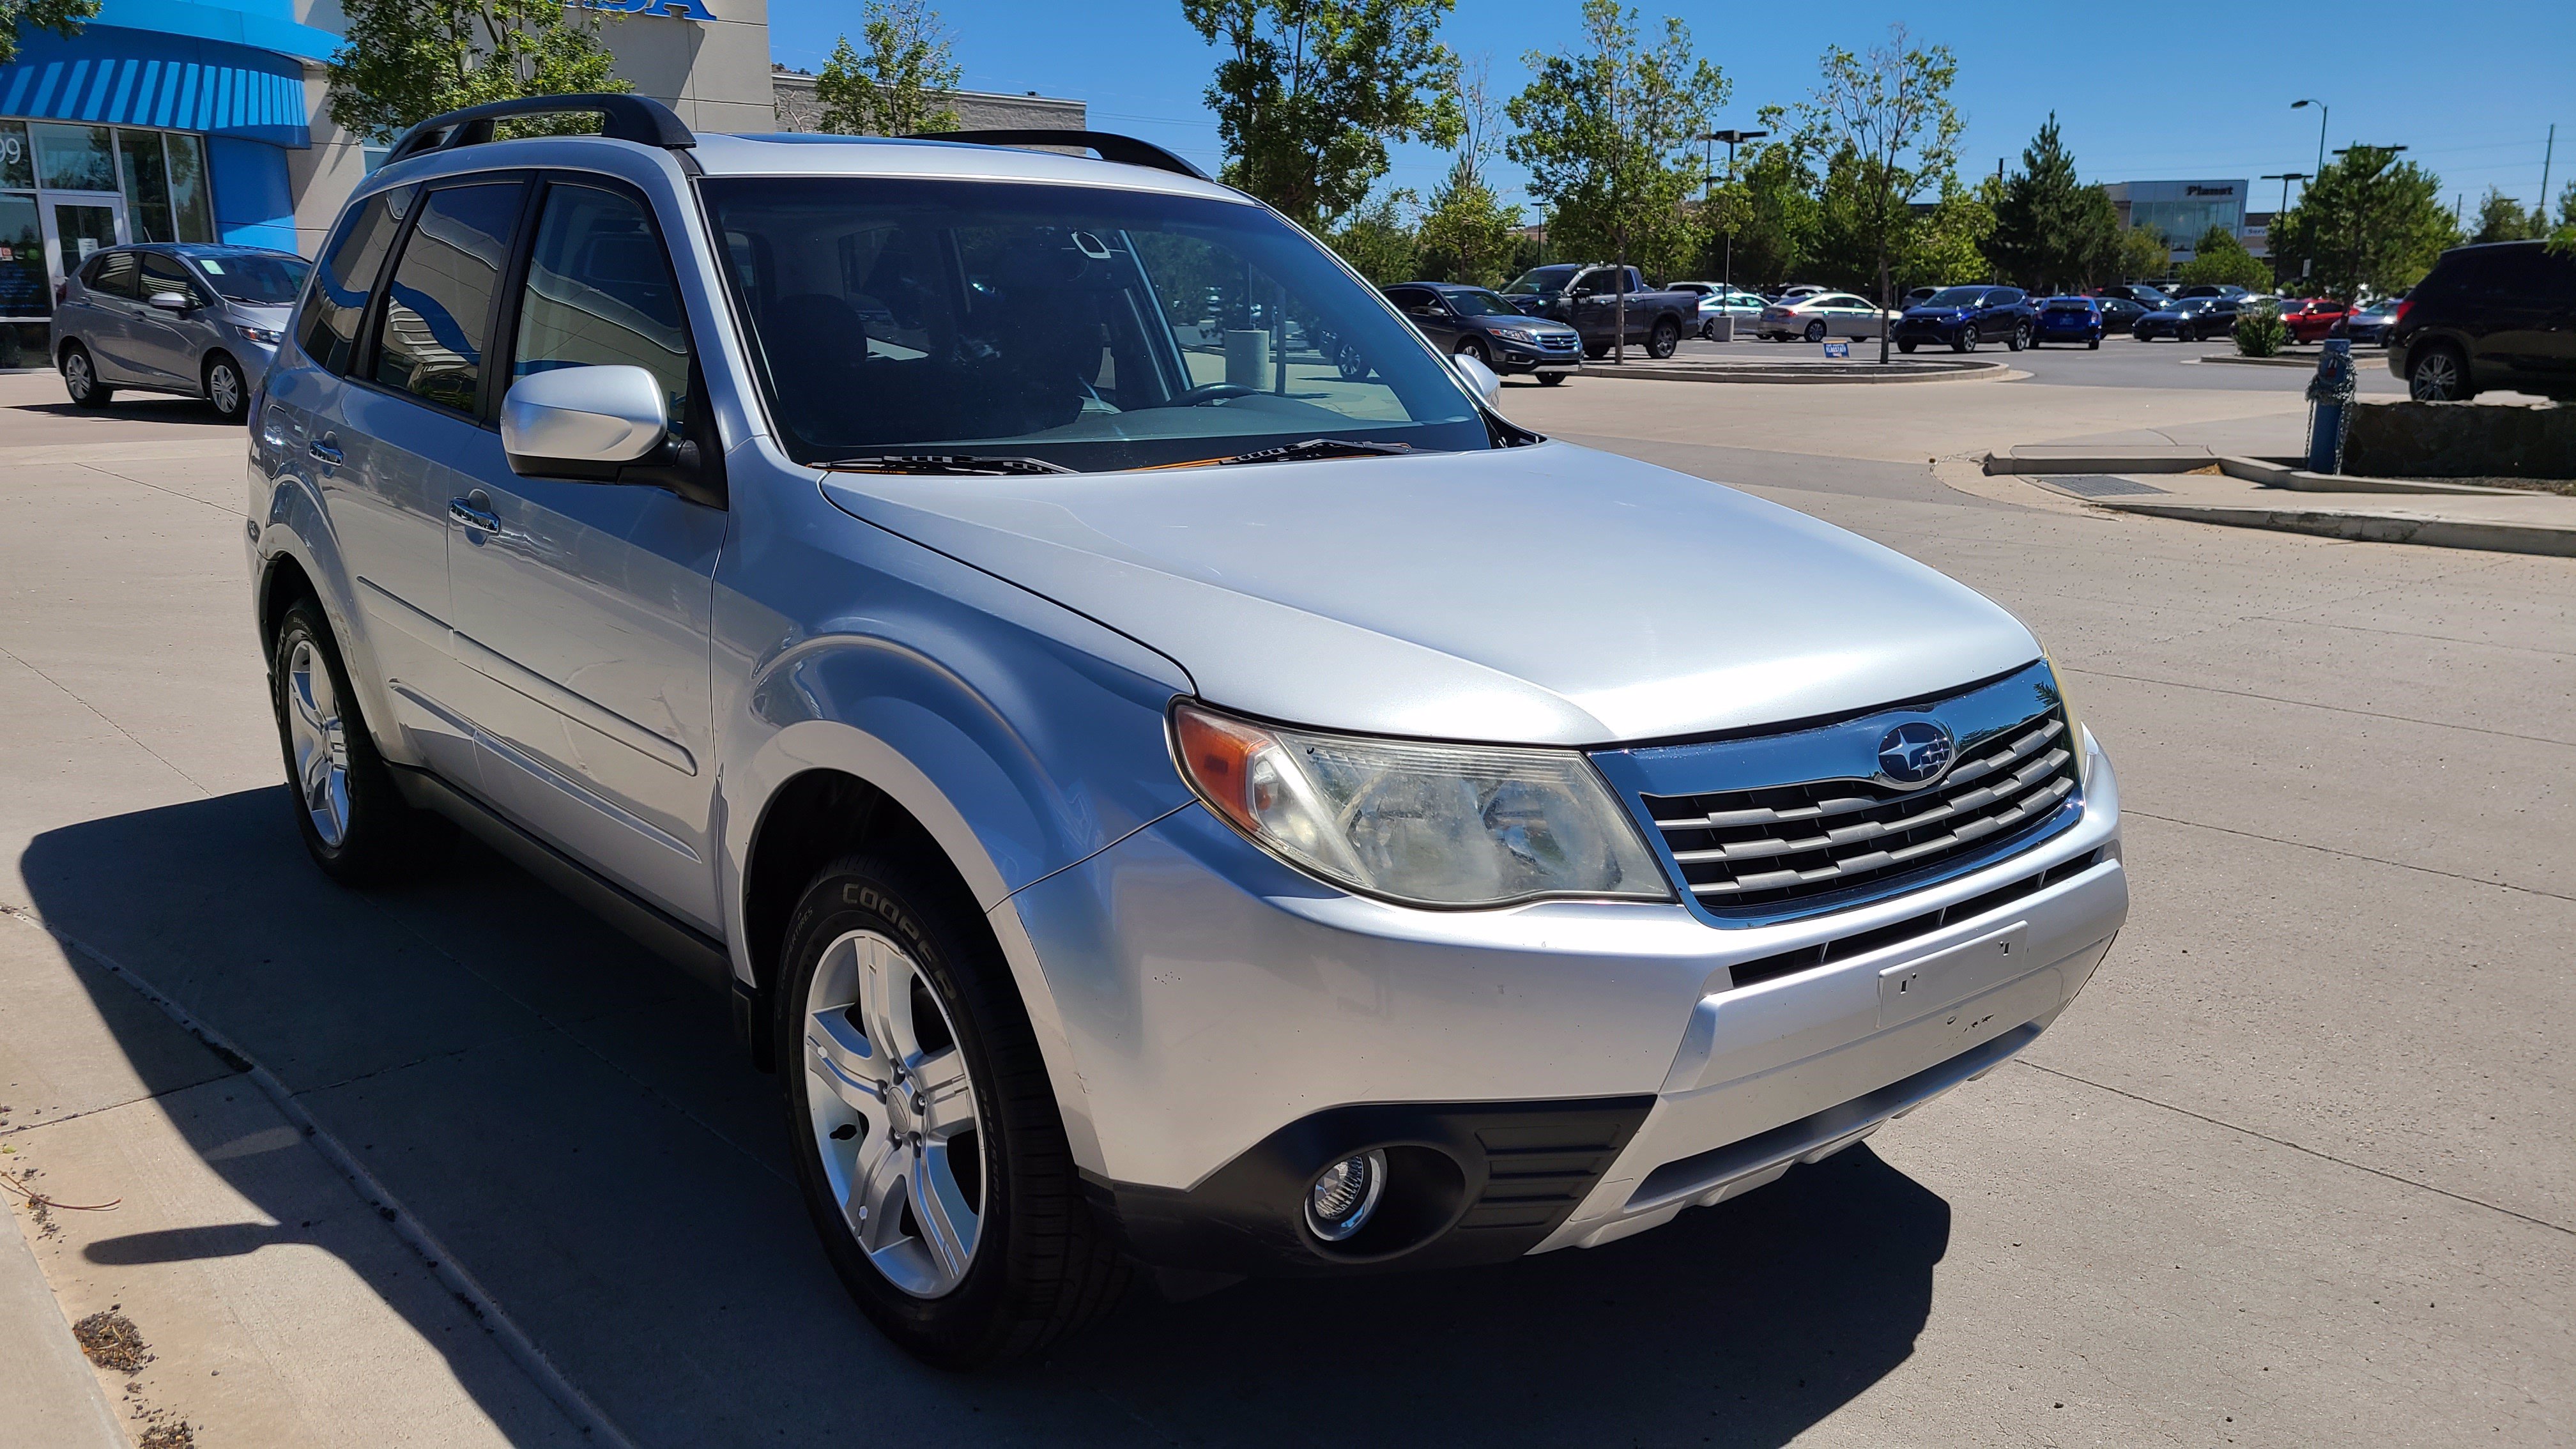 PreOwned 2009 Subaru Forester X Limited Sport Utility in